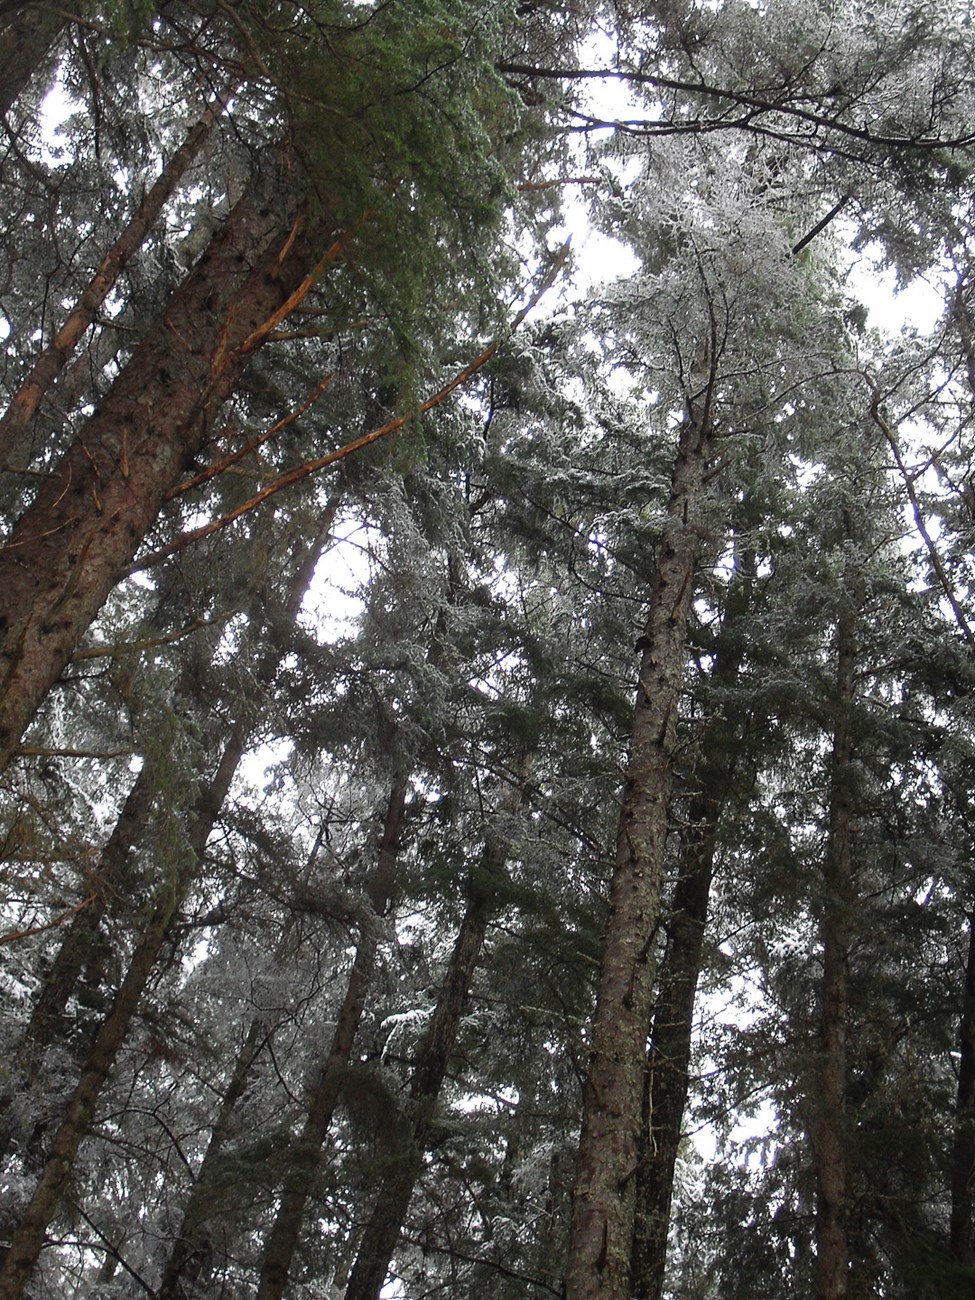 Looking up into the snowy canopy of old, tall western hemlock and Sitka spruce.